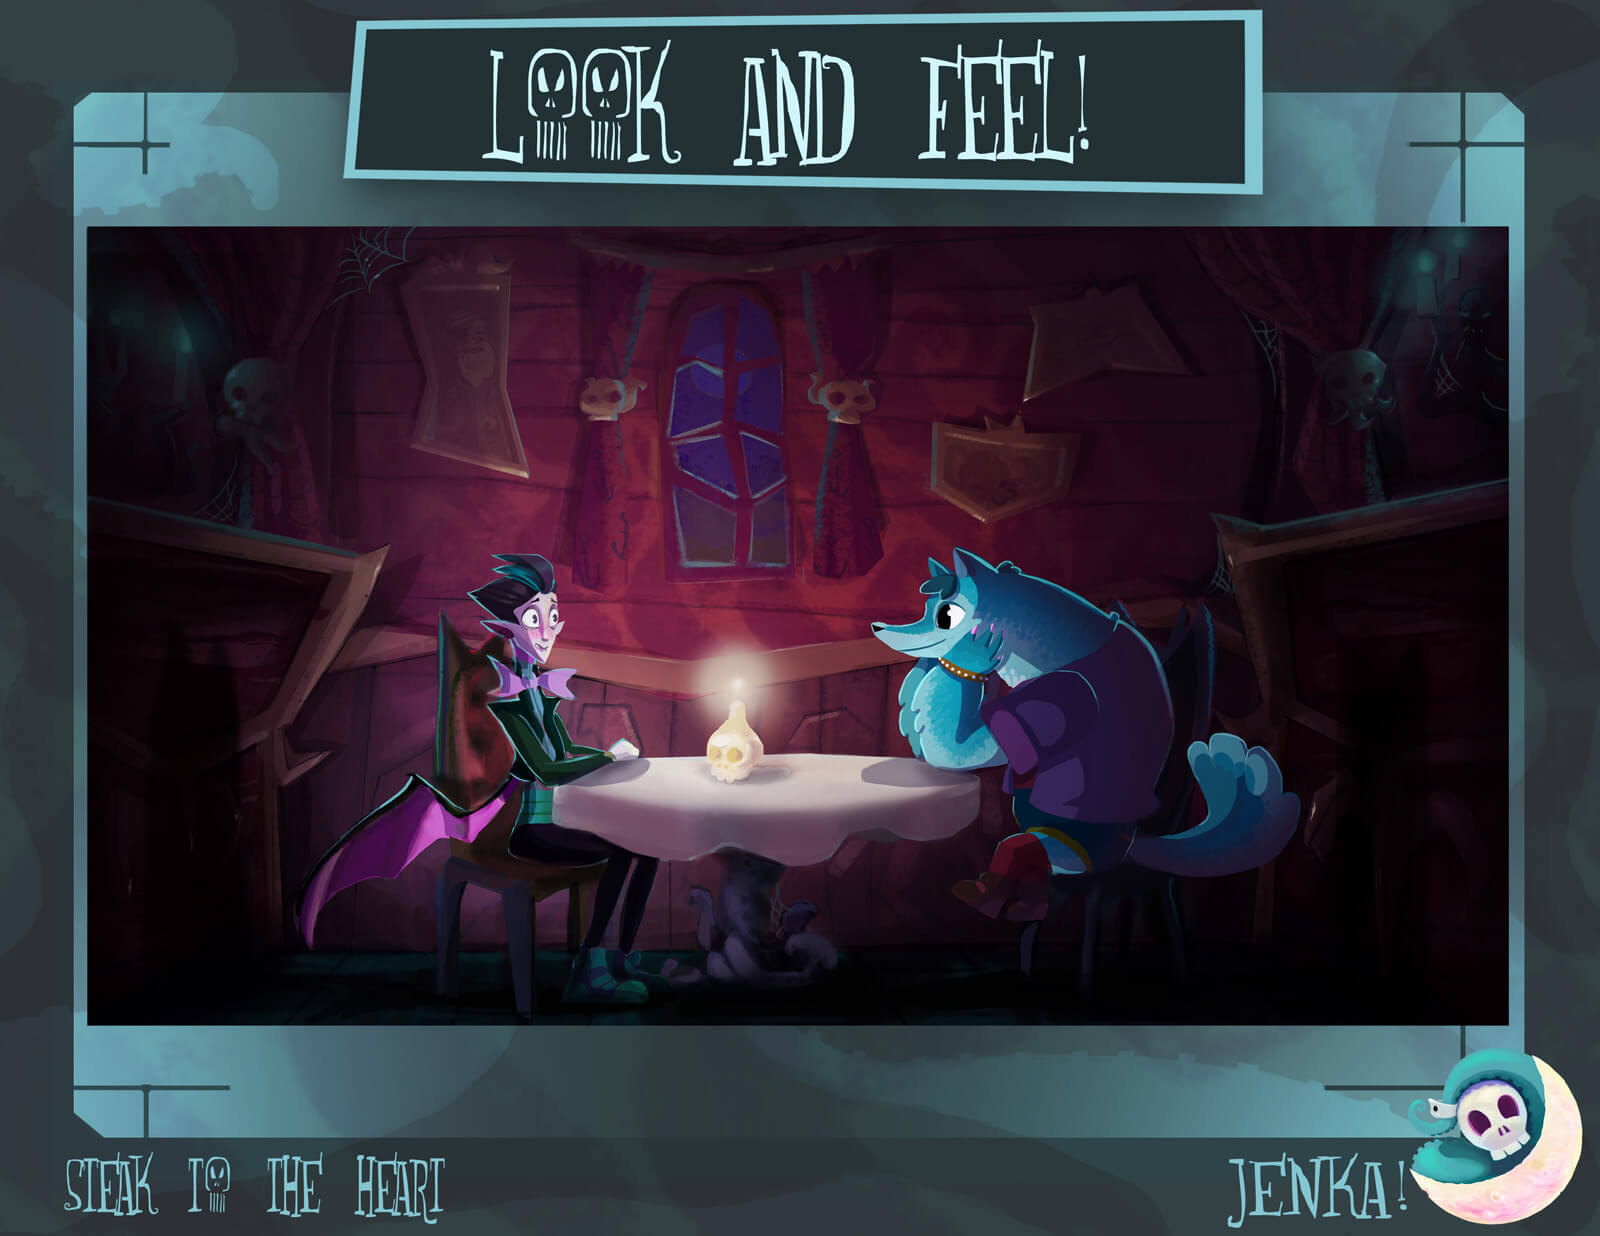 Look and Feel slide for the film Steak to the Heart, with a blue werewolf and pink vampire sitting at a candlelit table in a restaurant